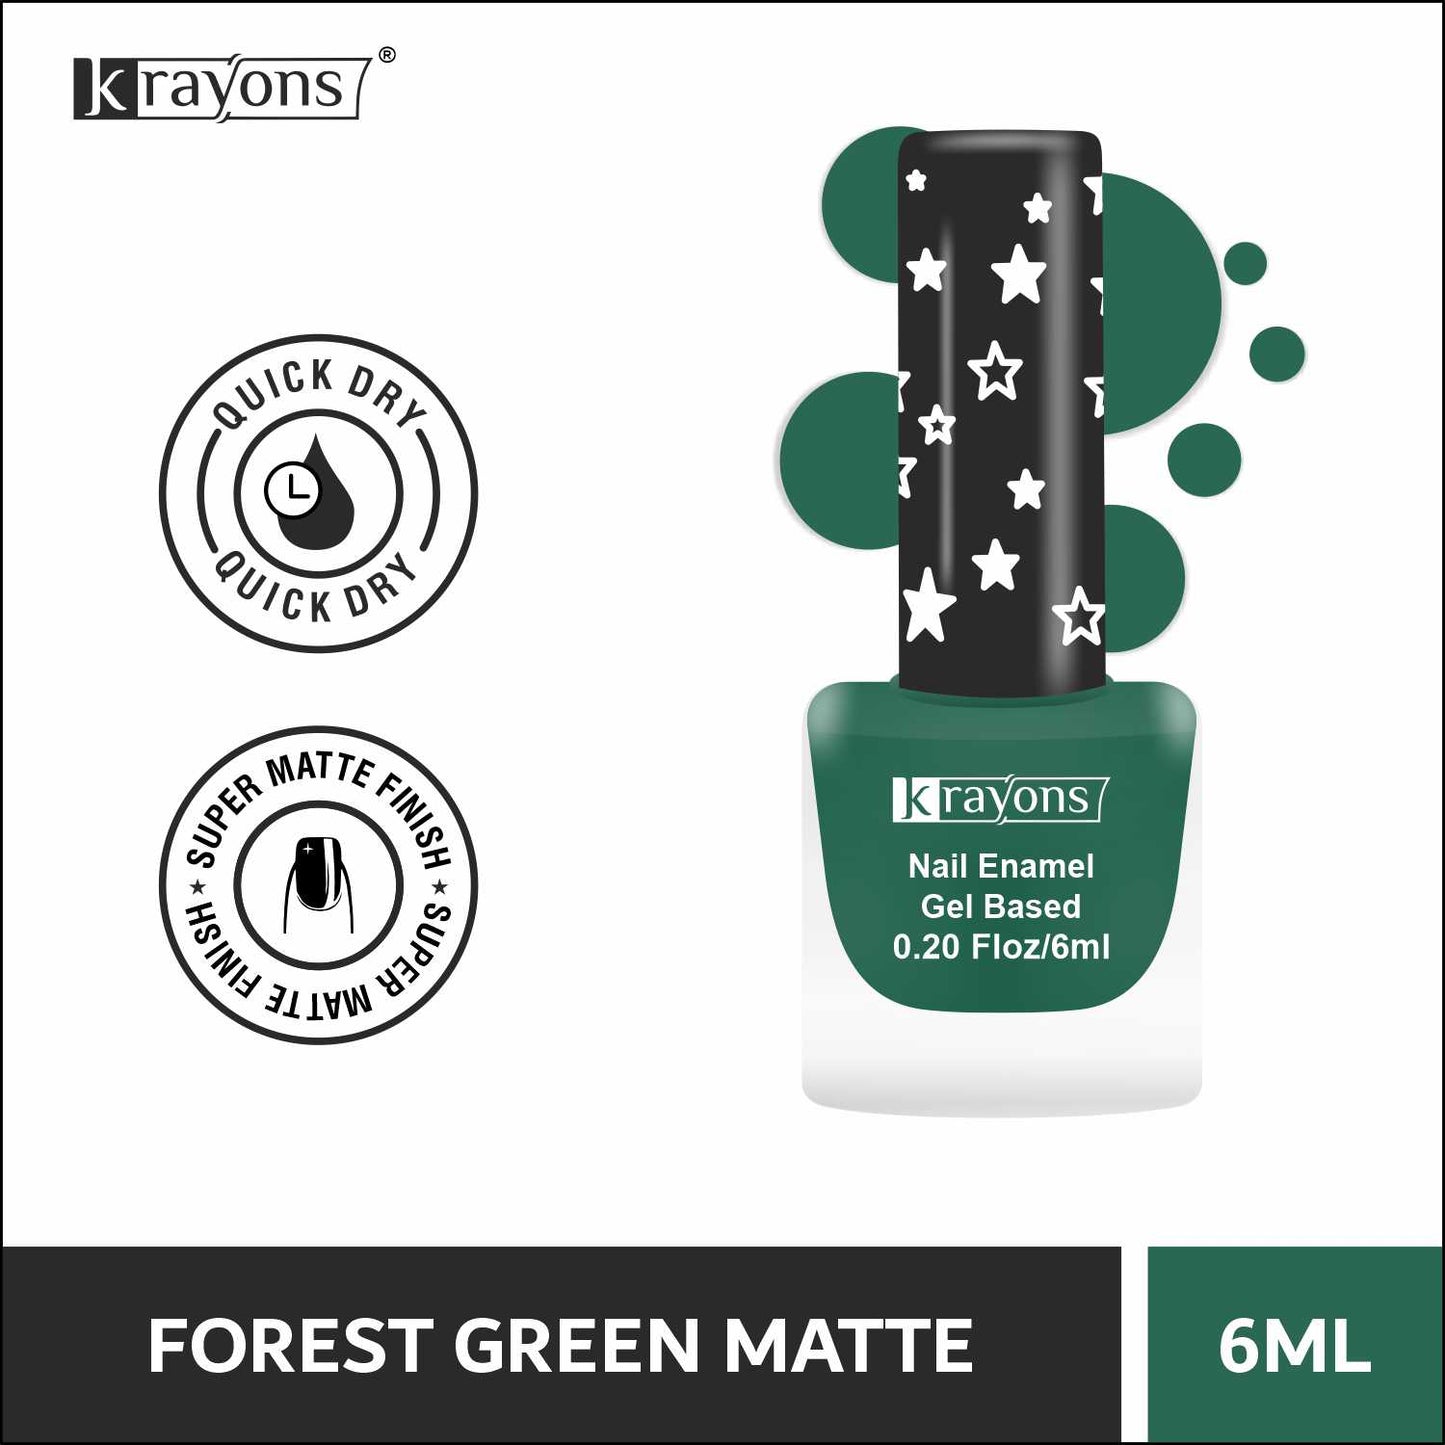 Krayons Cute Super Matte Finish Nail Enamel, Quick Dry, Smooth Finish, LongLasting, Forest Green, 6ml